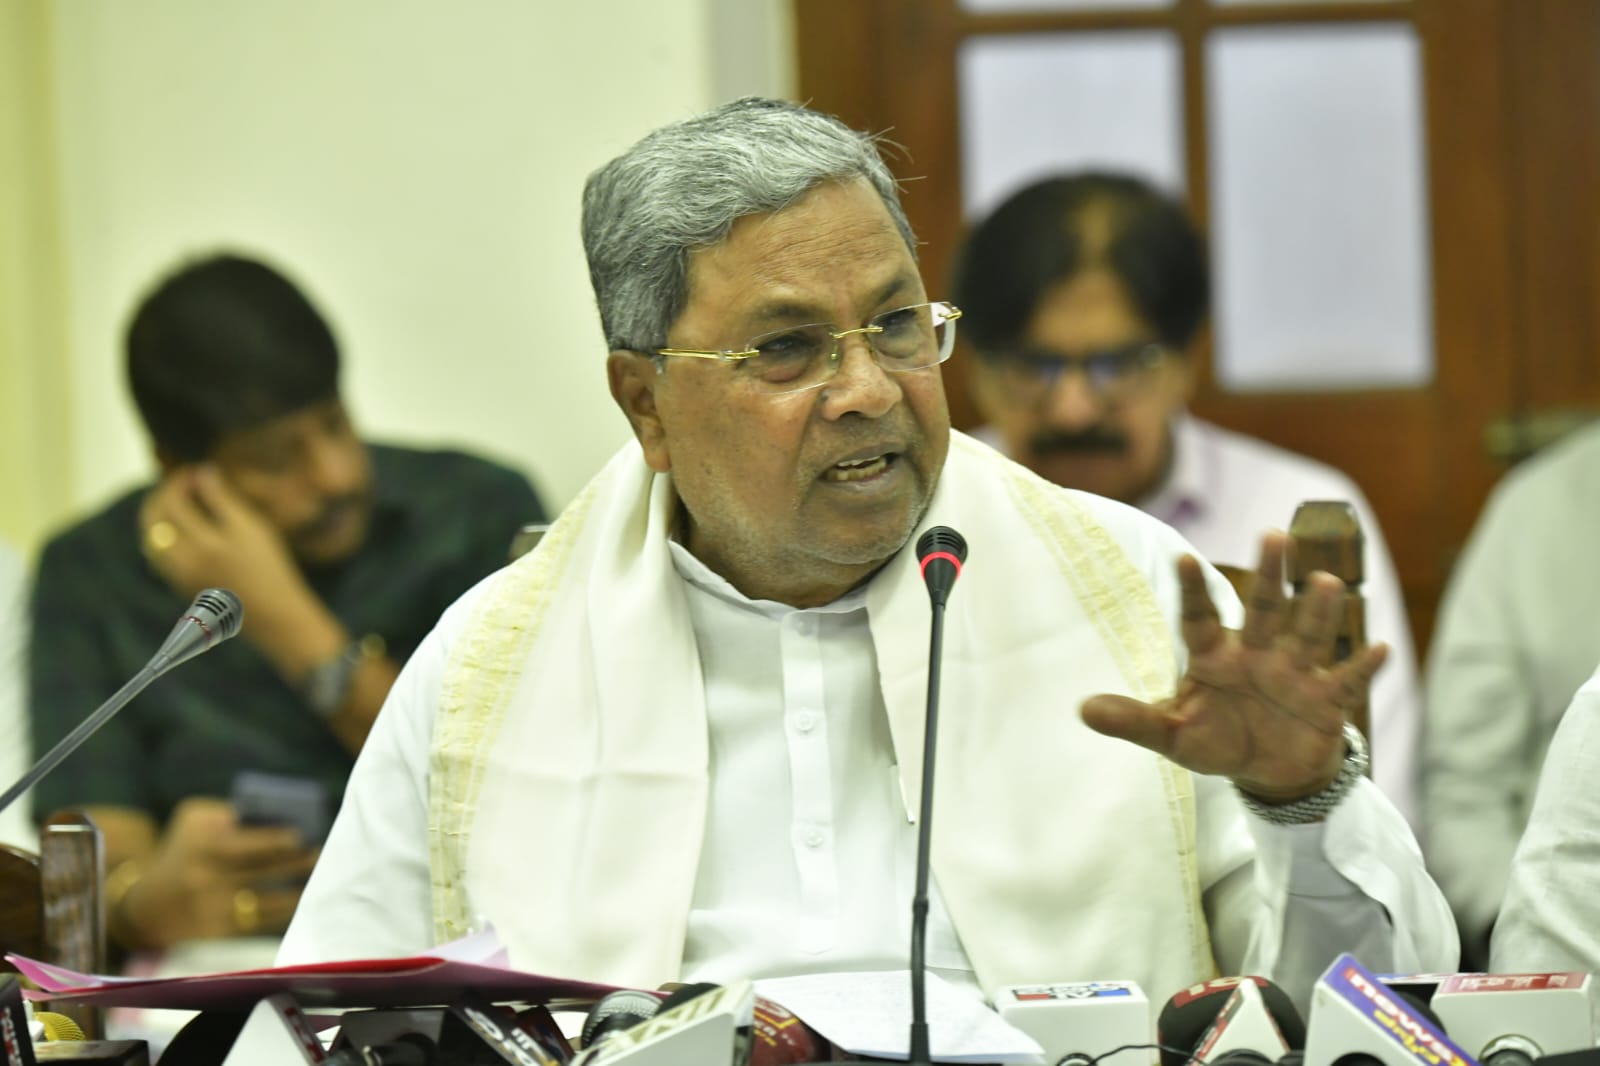 Karnataka Chief Minister Siddaramaiah during a press conference on fiscal autonomy for States. (Supplied)